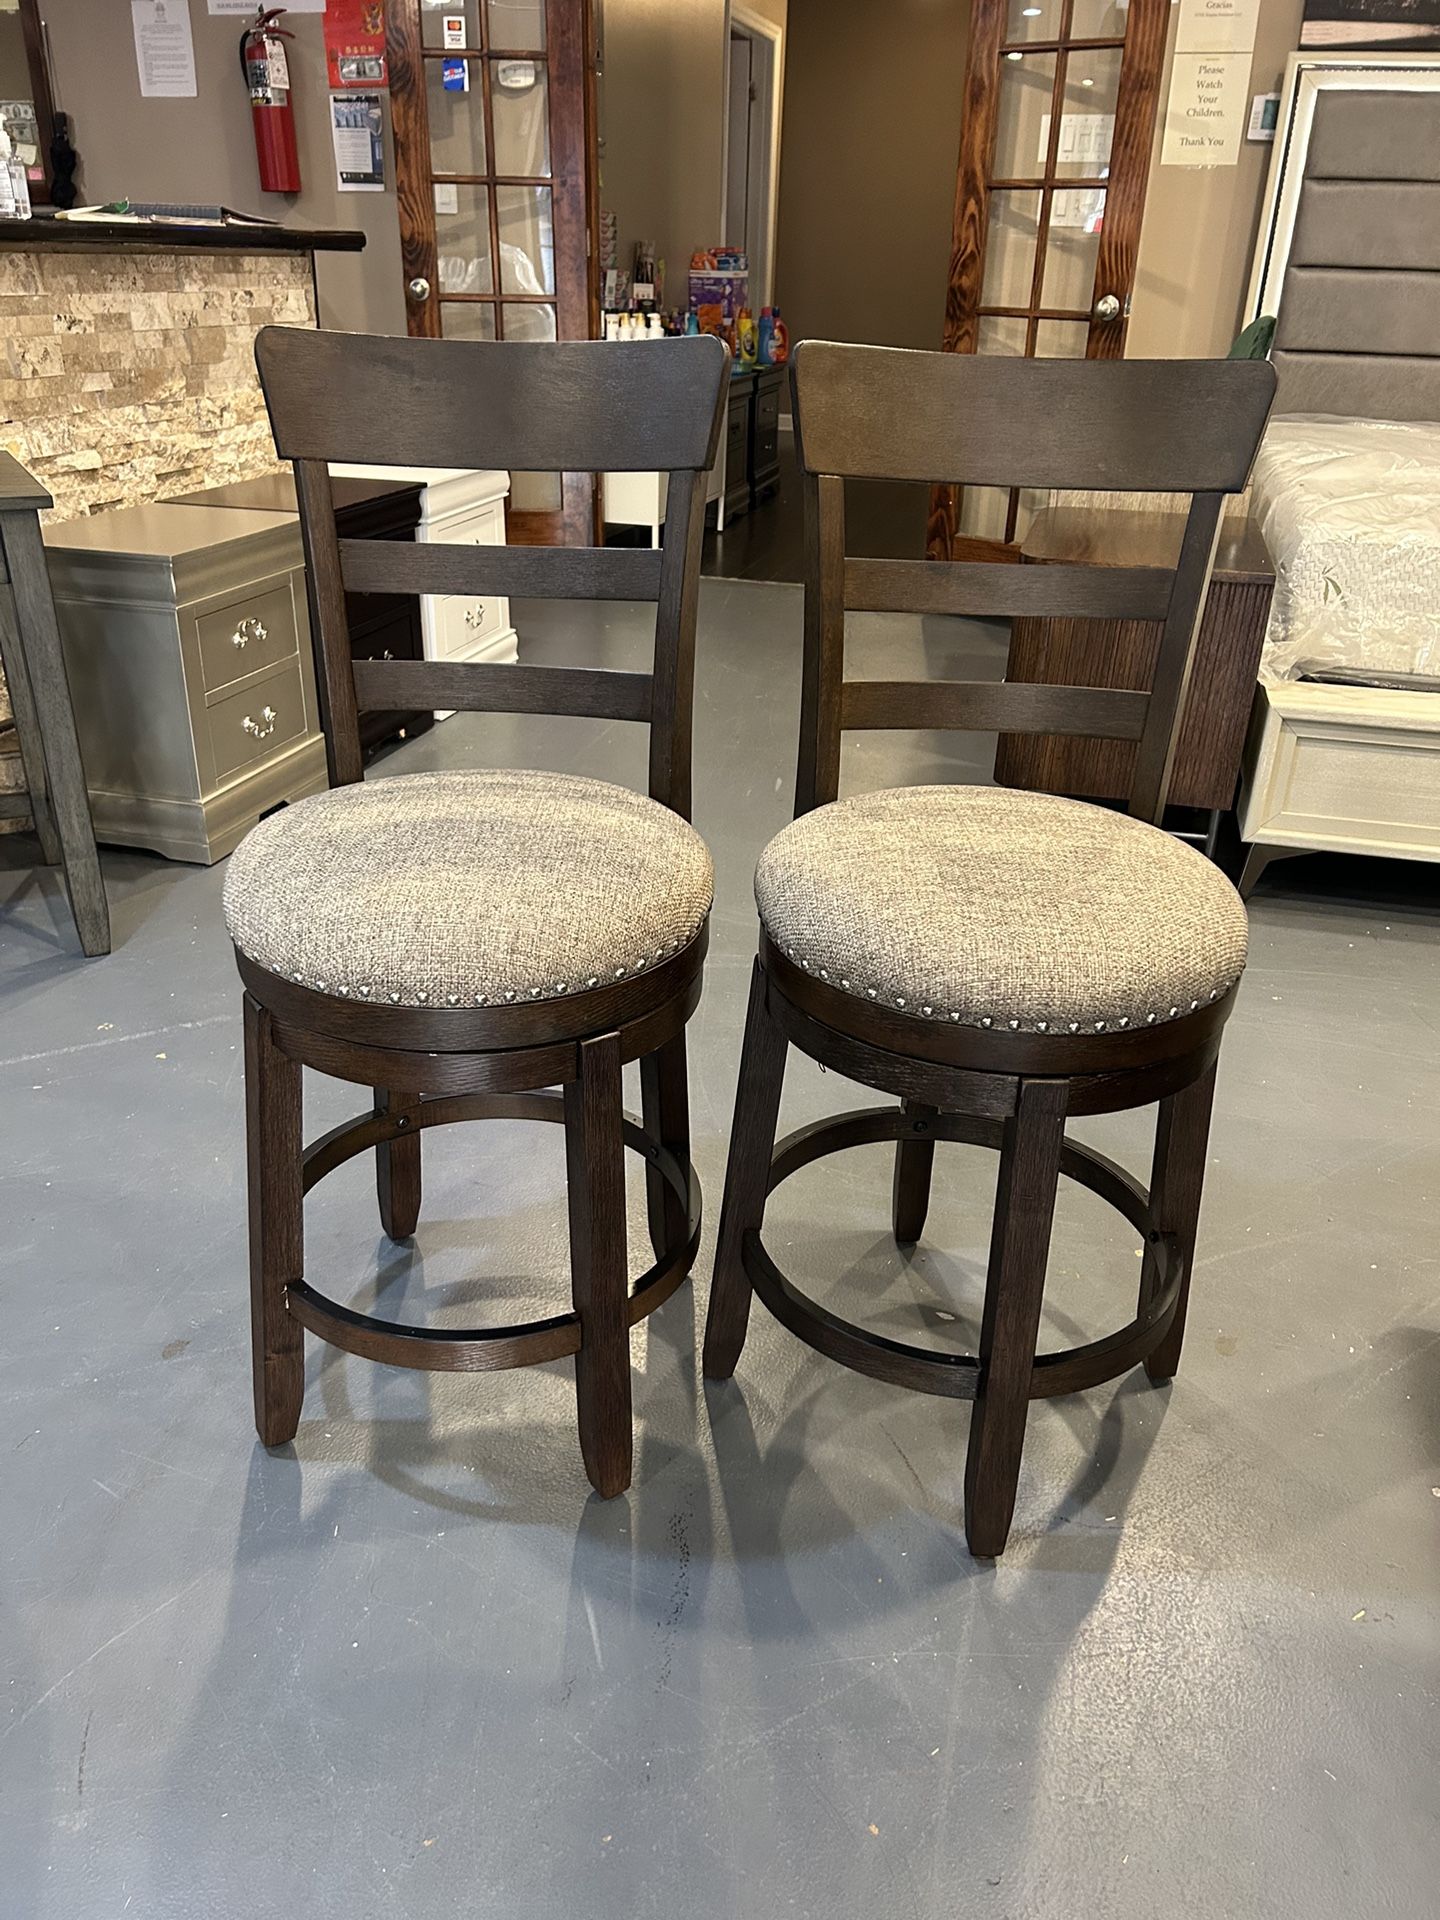 New Counter Height Stool Set (2)